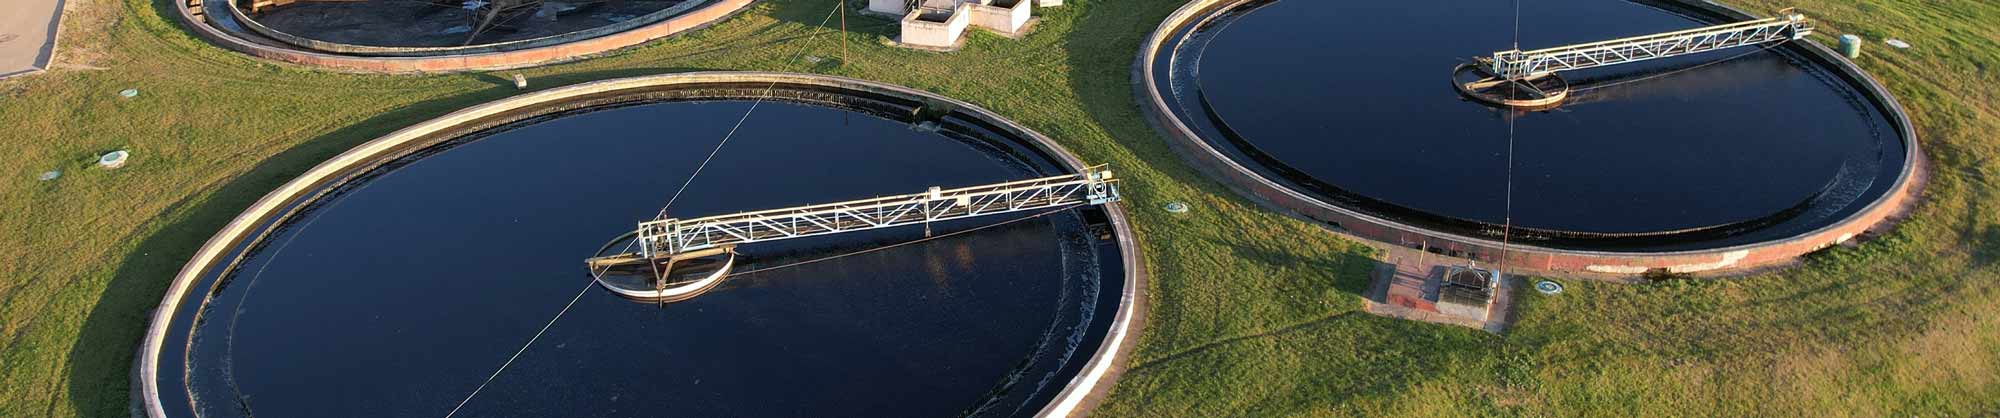 Water treatment in a tertiary clarifier